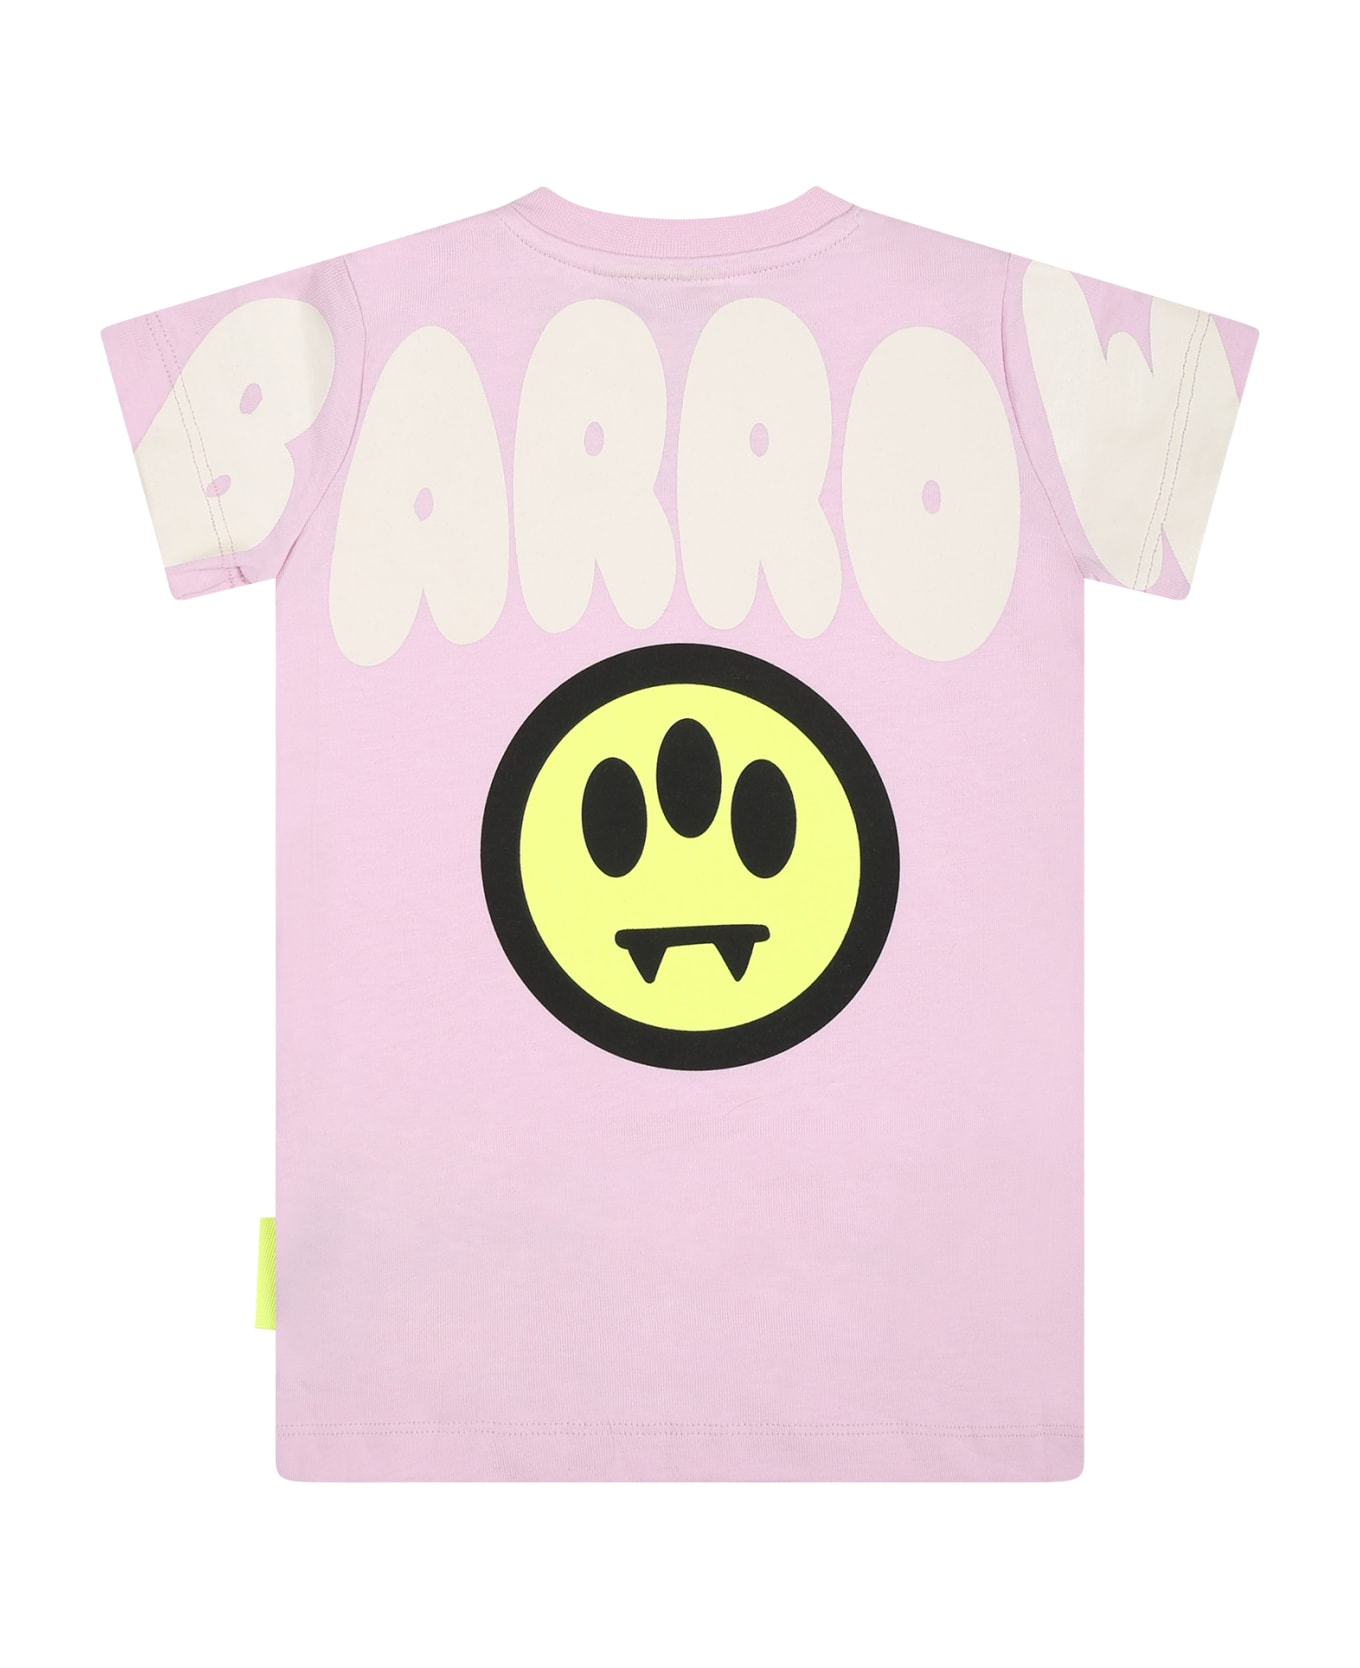 Barrow Pink Dress For Baby Girl With Logo - Pink ウェア